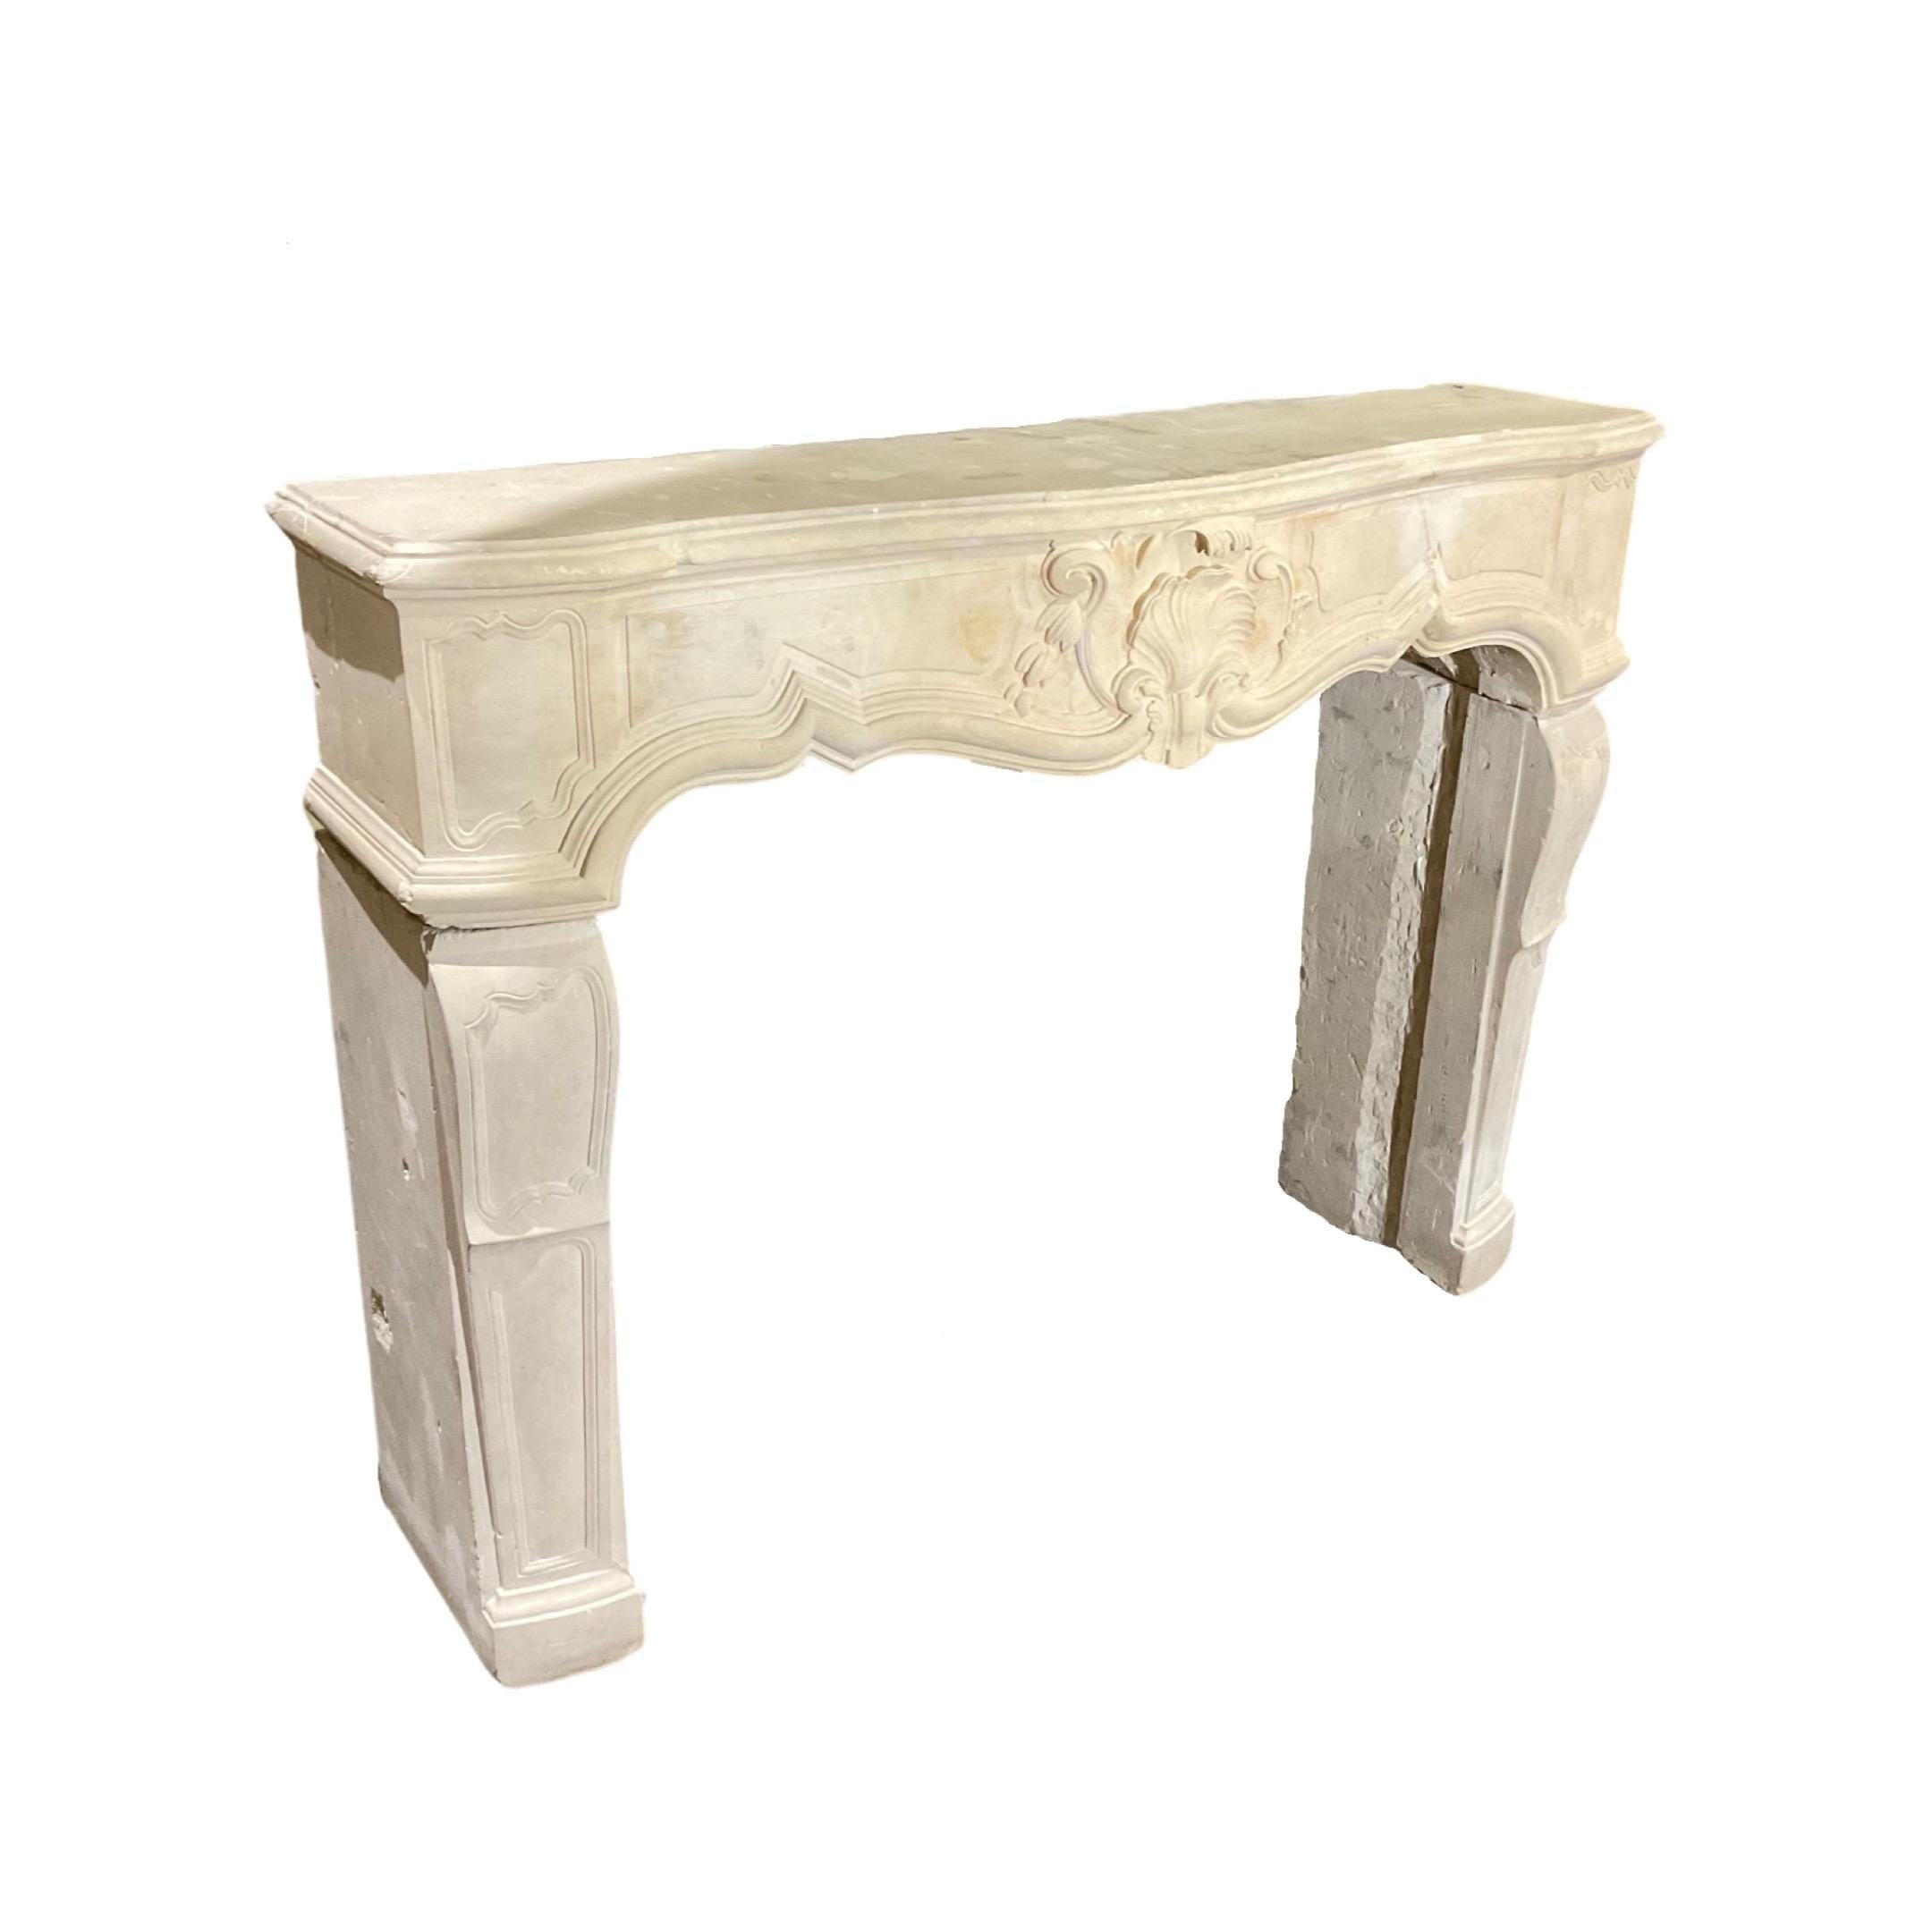 Louis XVI-style mantel. Made out of Limestone. Originates From France. Circa, 1850.